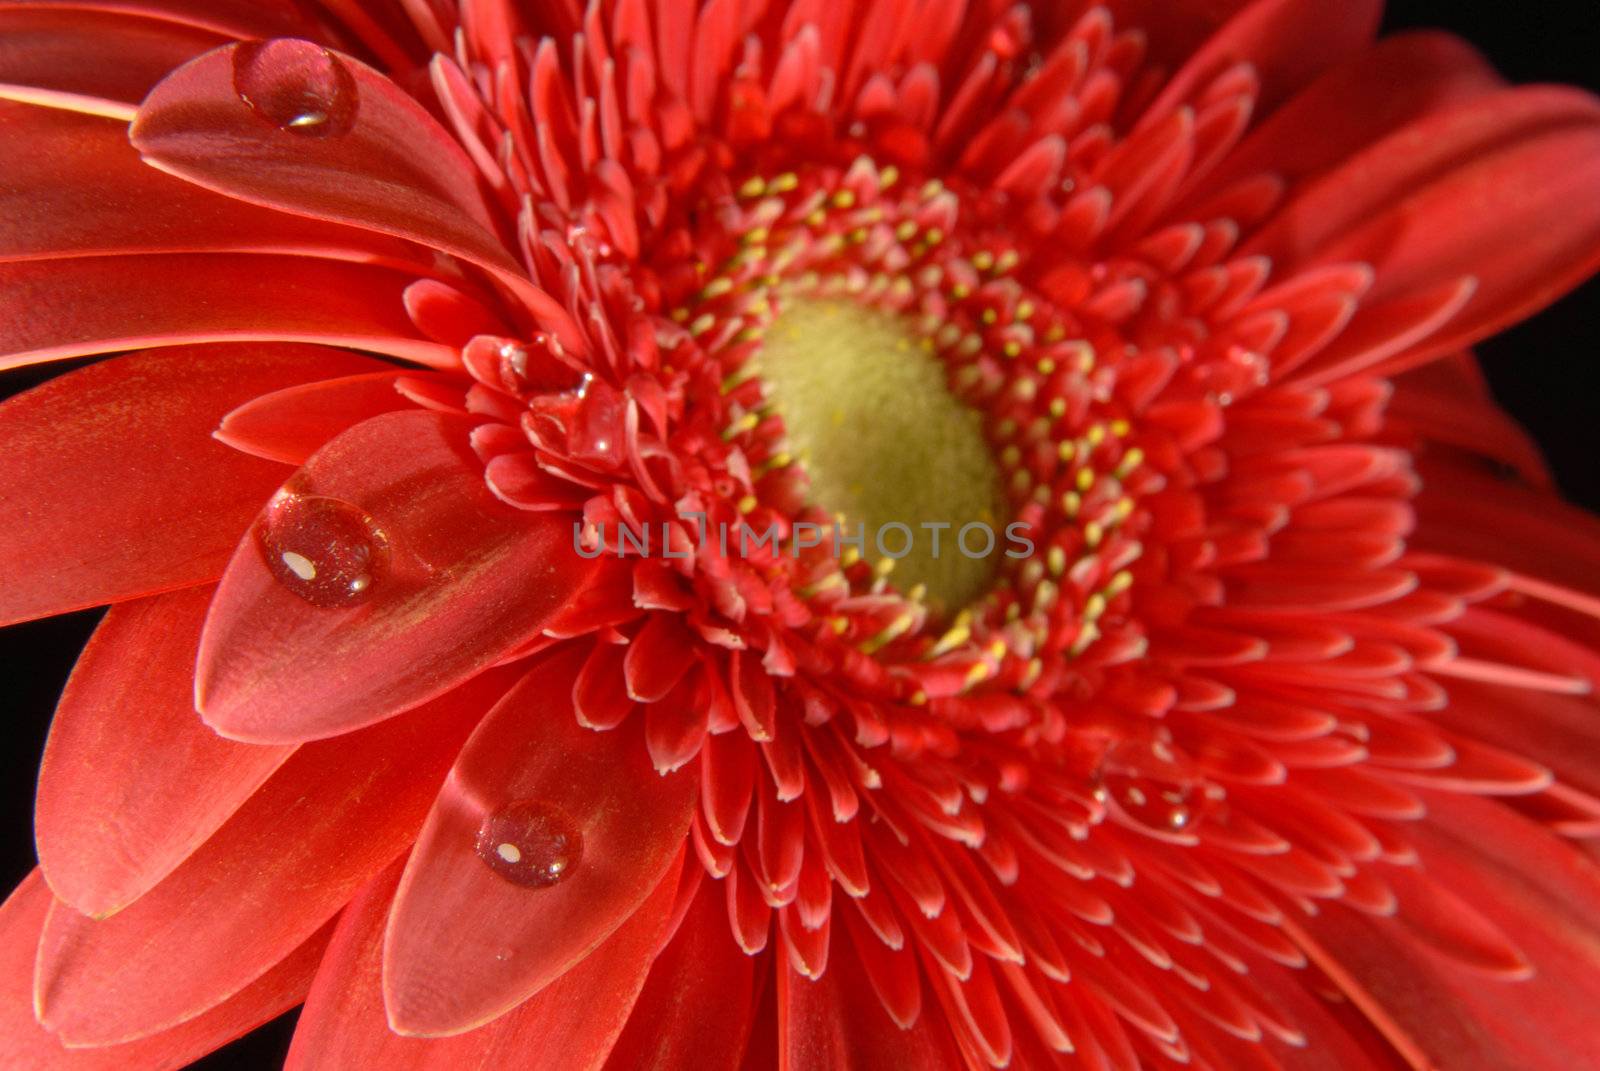 Red gerbera flower texture close up with little water drops on black background.